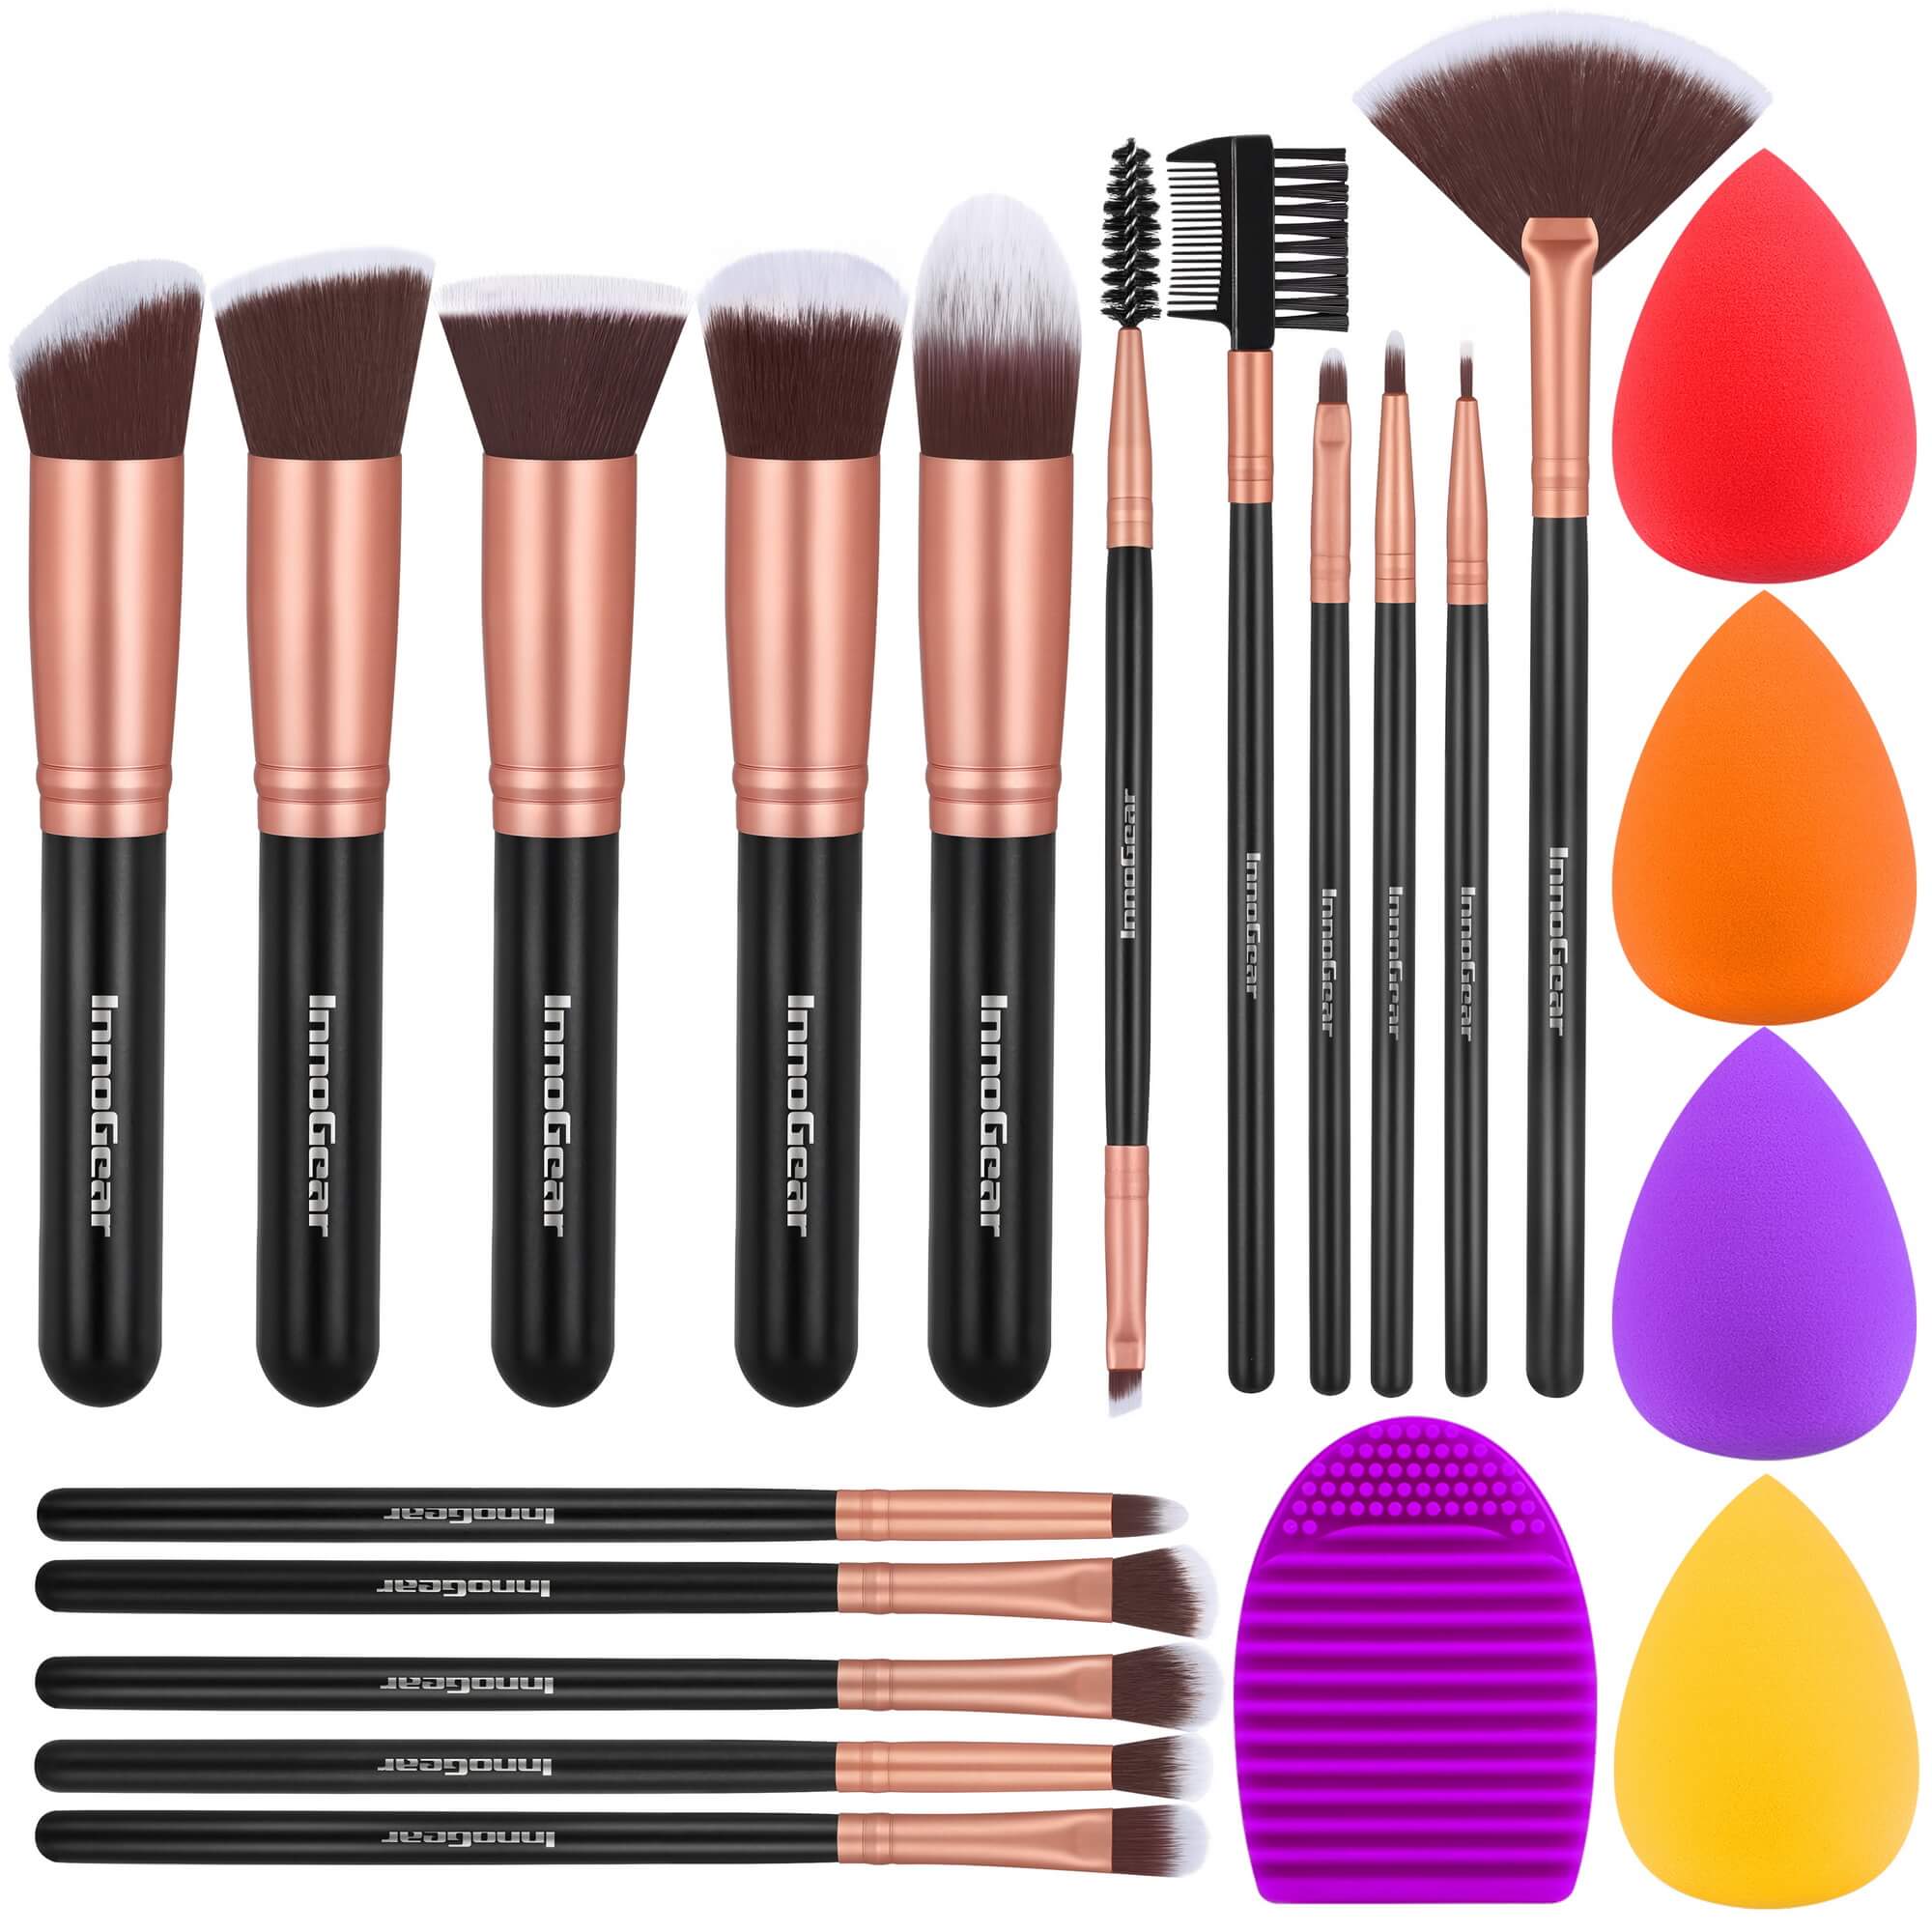 SHANY Rose All Day Professional Makeup Brush Set - 14 pieces